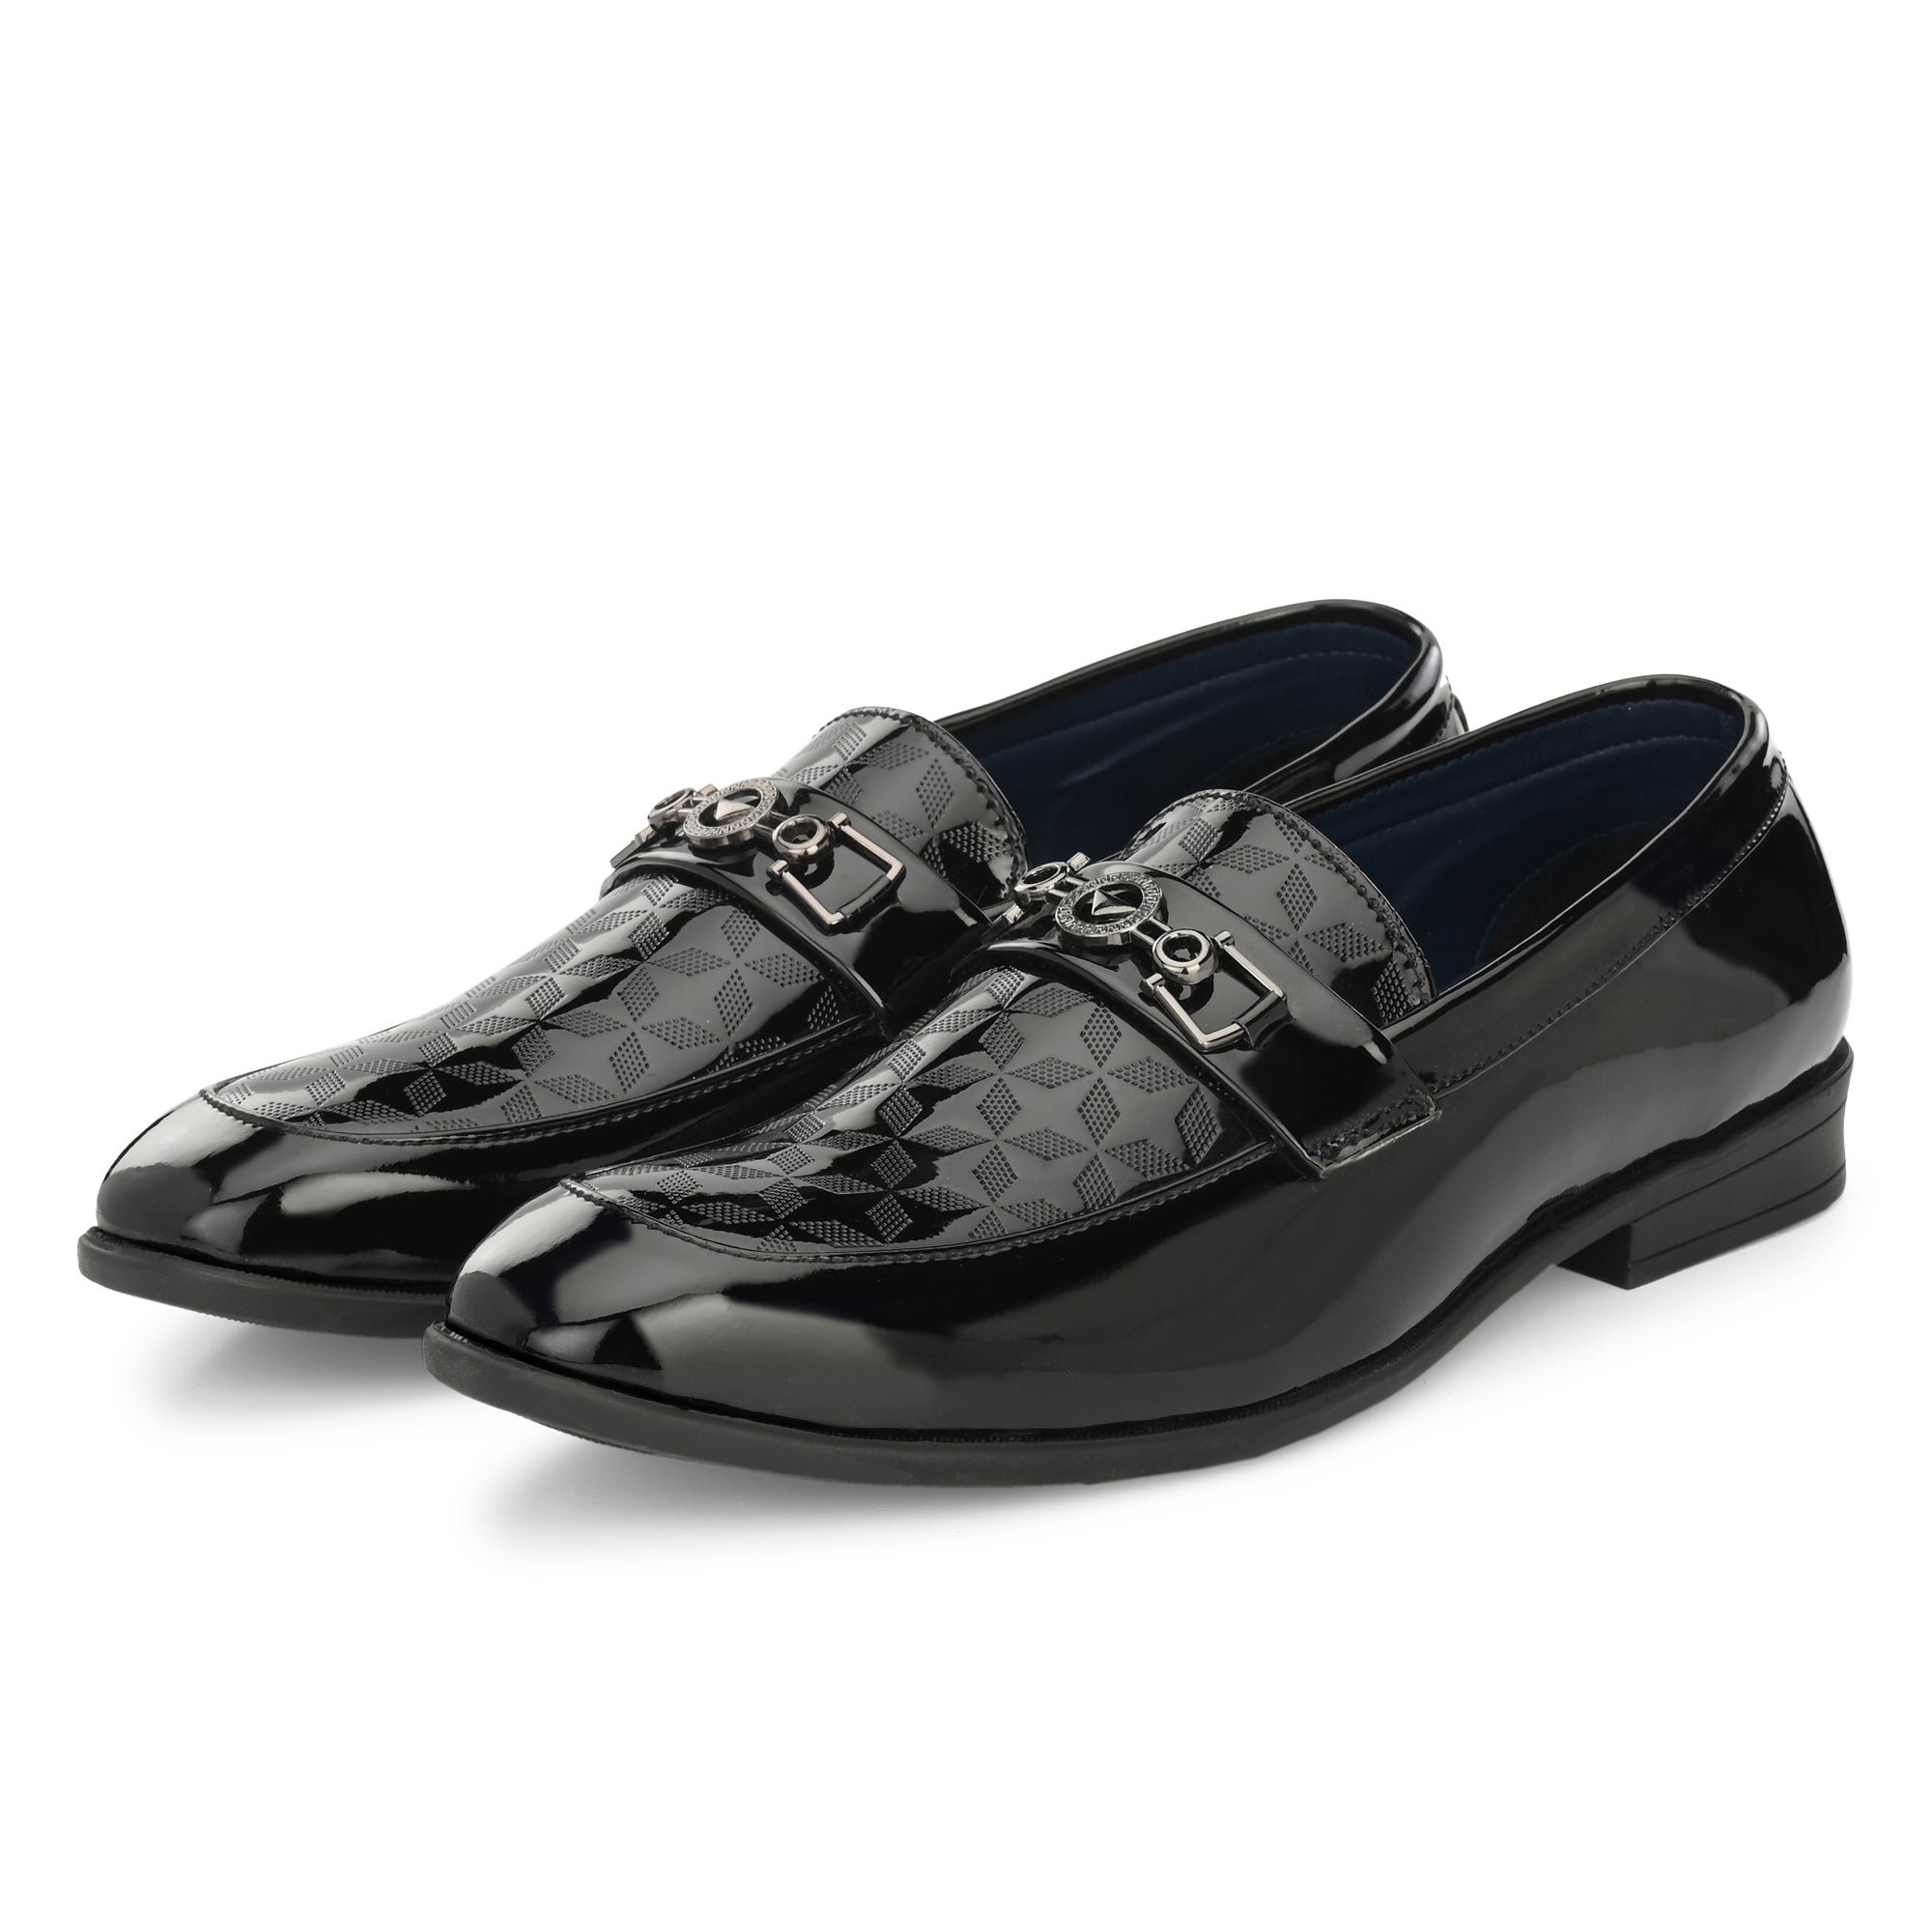 Black Textured Patent Loafer